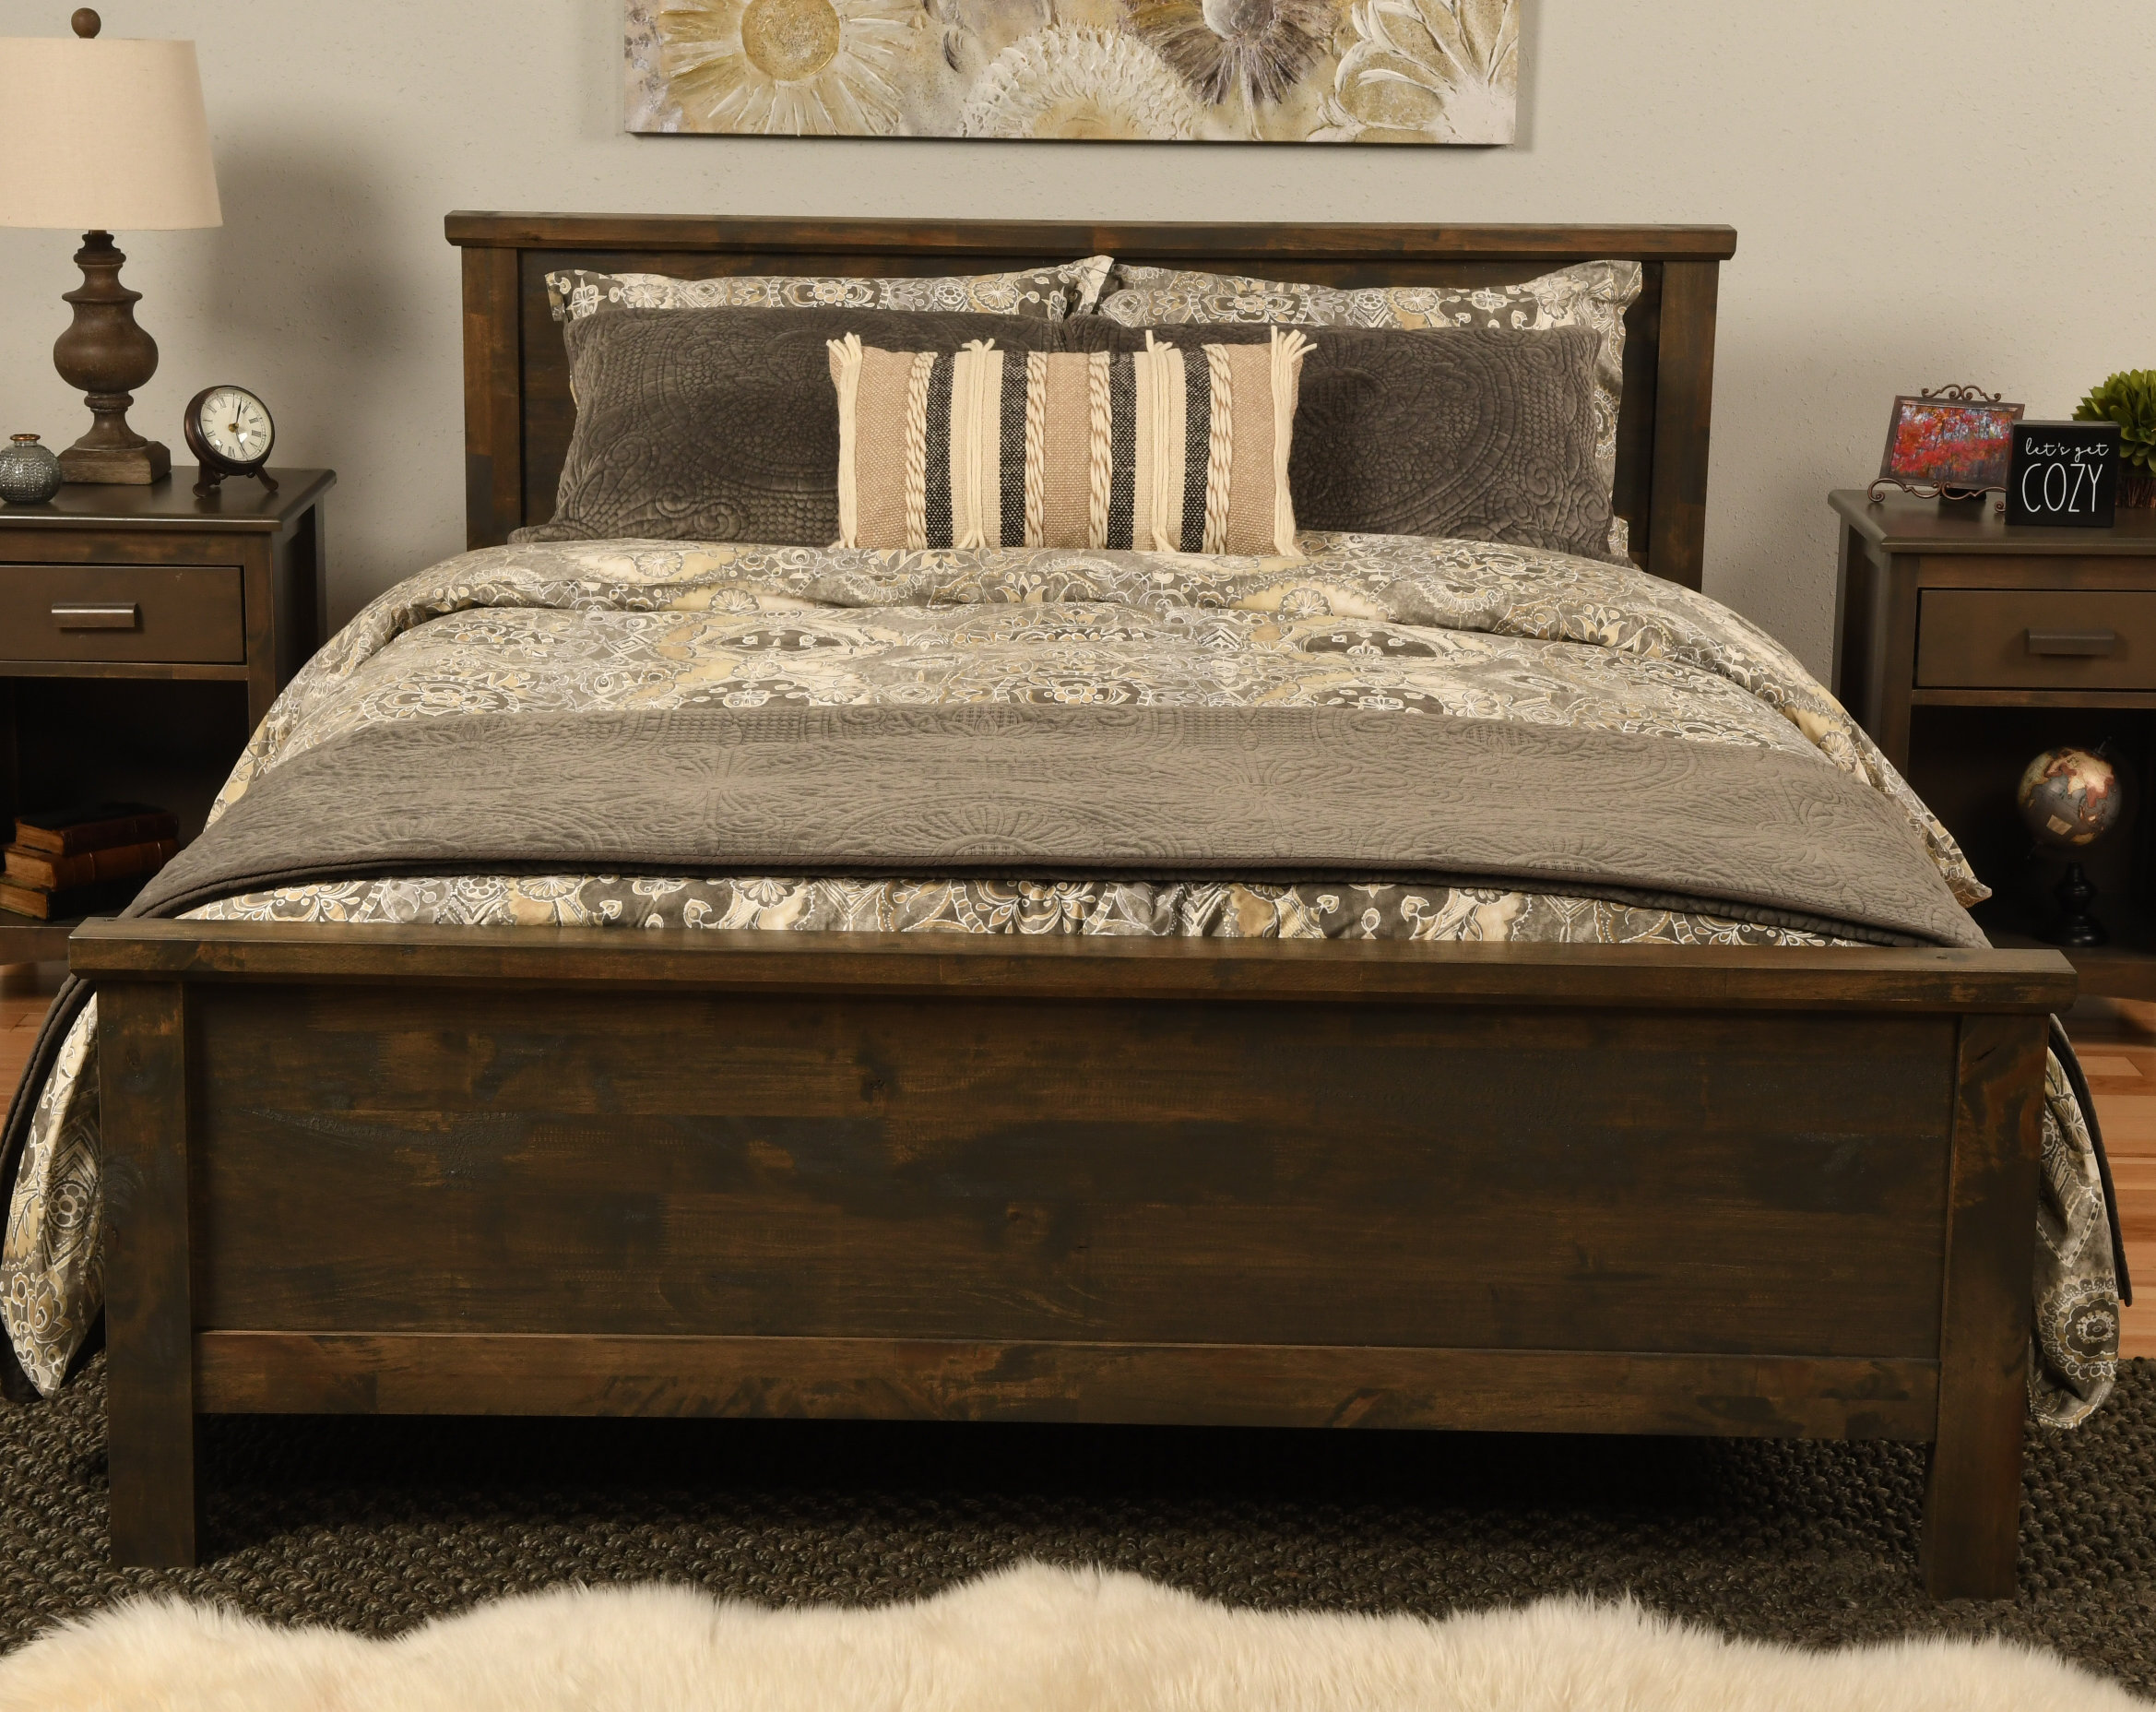 Wood Bed Frame Contemporary Solid Wood Platform Bed in Queen Size Solid Wood Bed Platform Bed Frame Wooden Bed Solid Wood Platform Bed